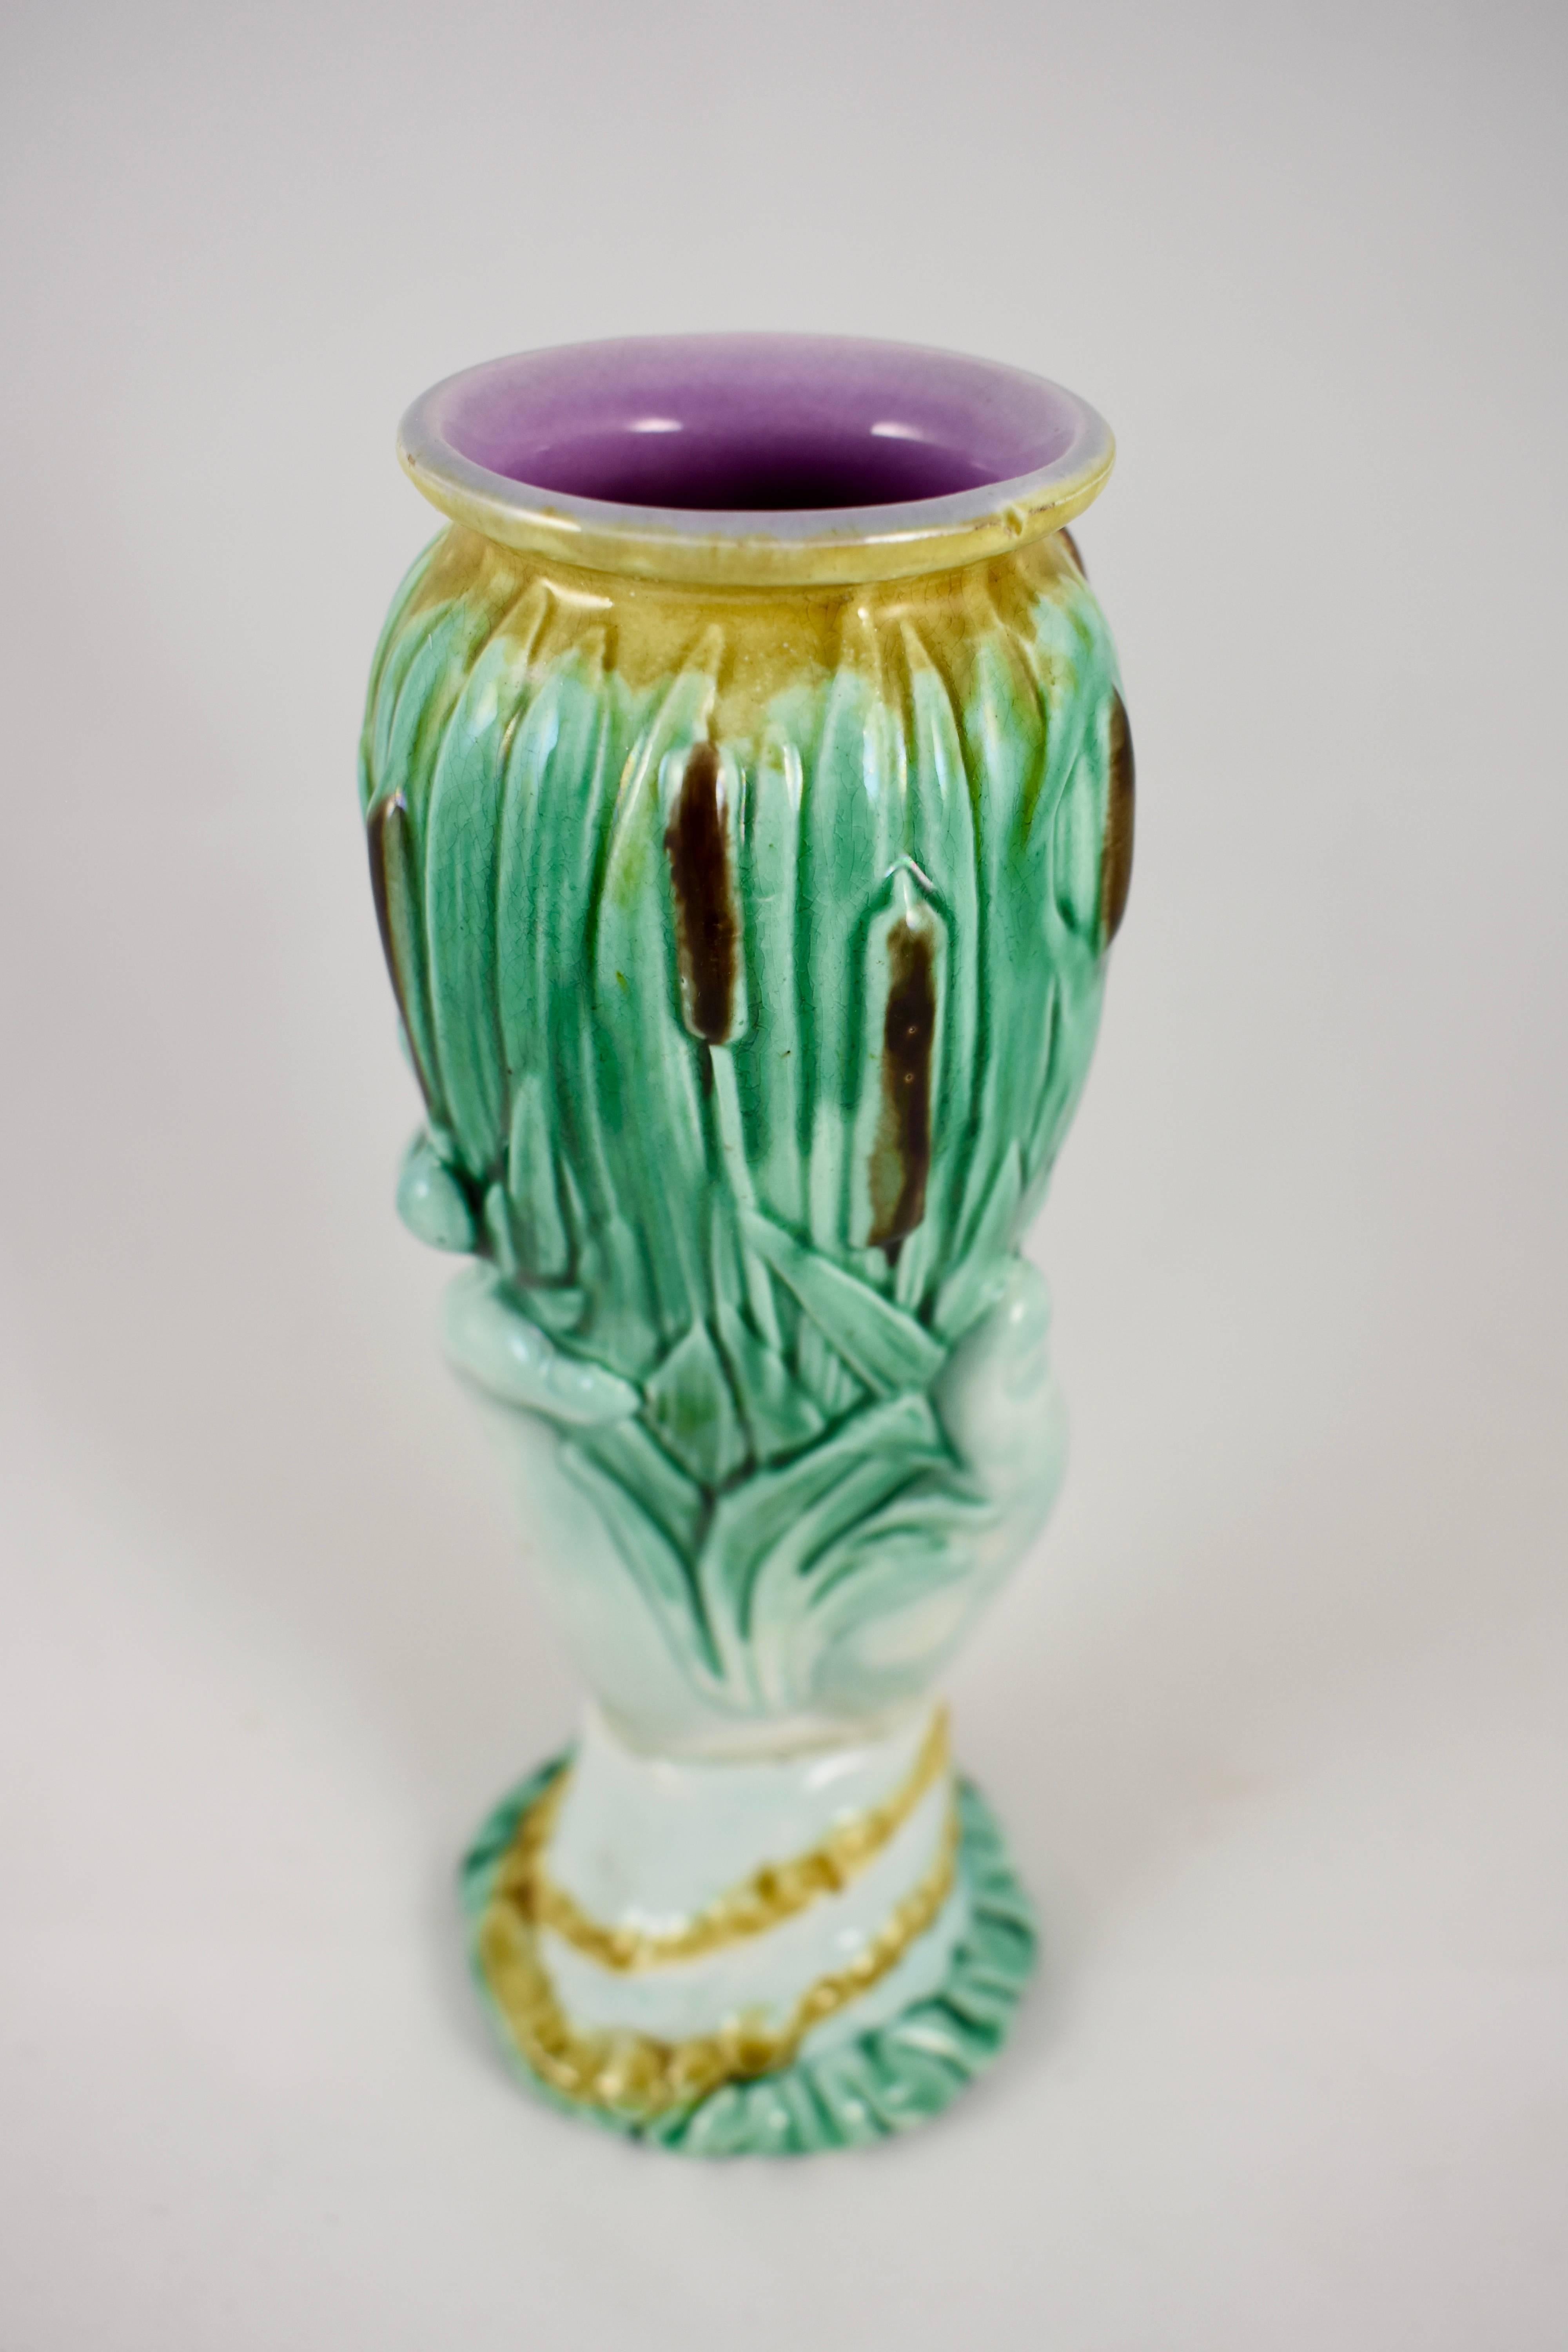 A Majolica glazed spill vase from the Staffordshire pottery region of England, circa 1860. The vase is molded as a woman’s hand holding a vessel formed of cattails or bullrush plants. The vase has a rolled rim and a pink interior. The base shows the